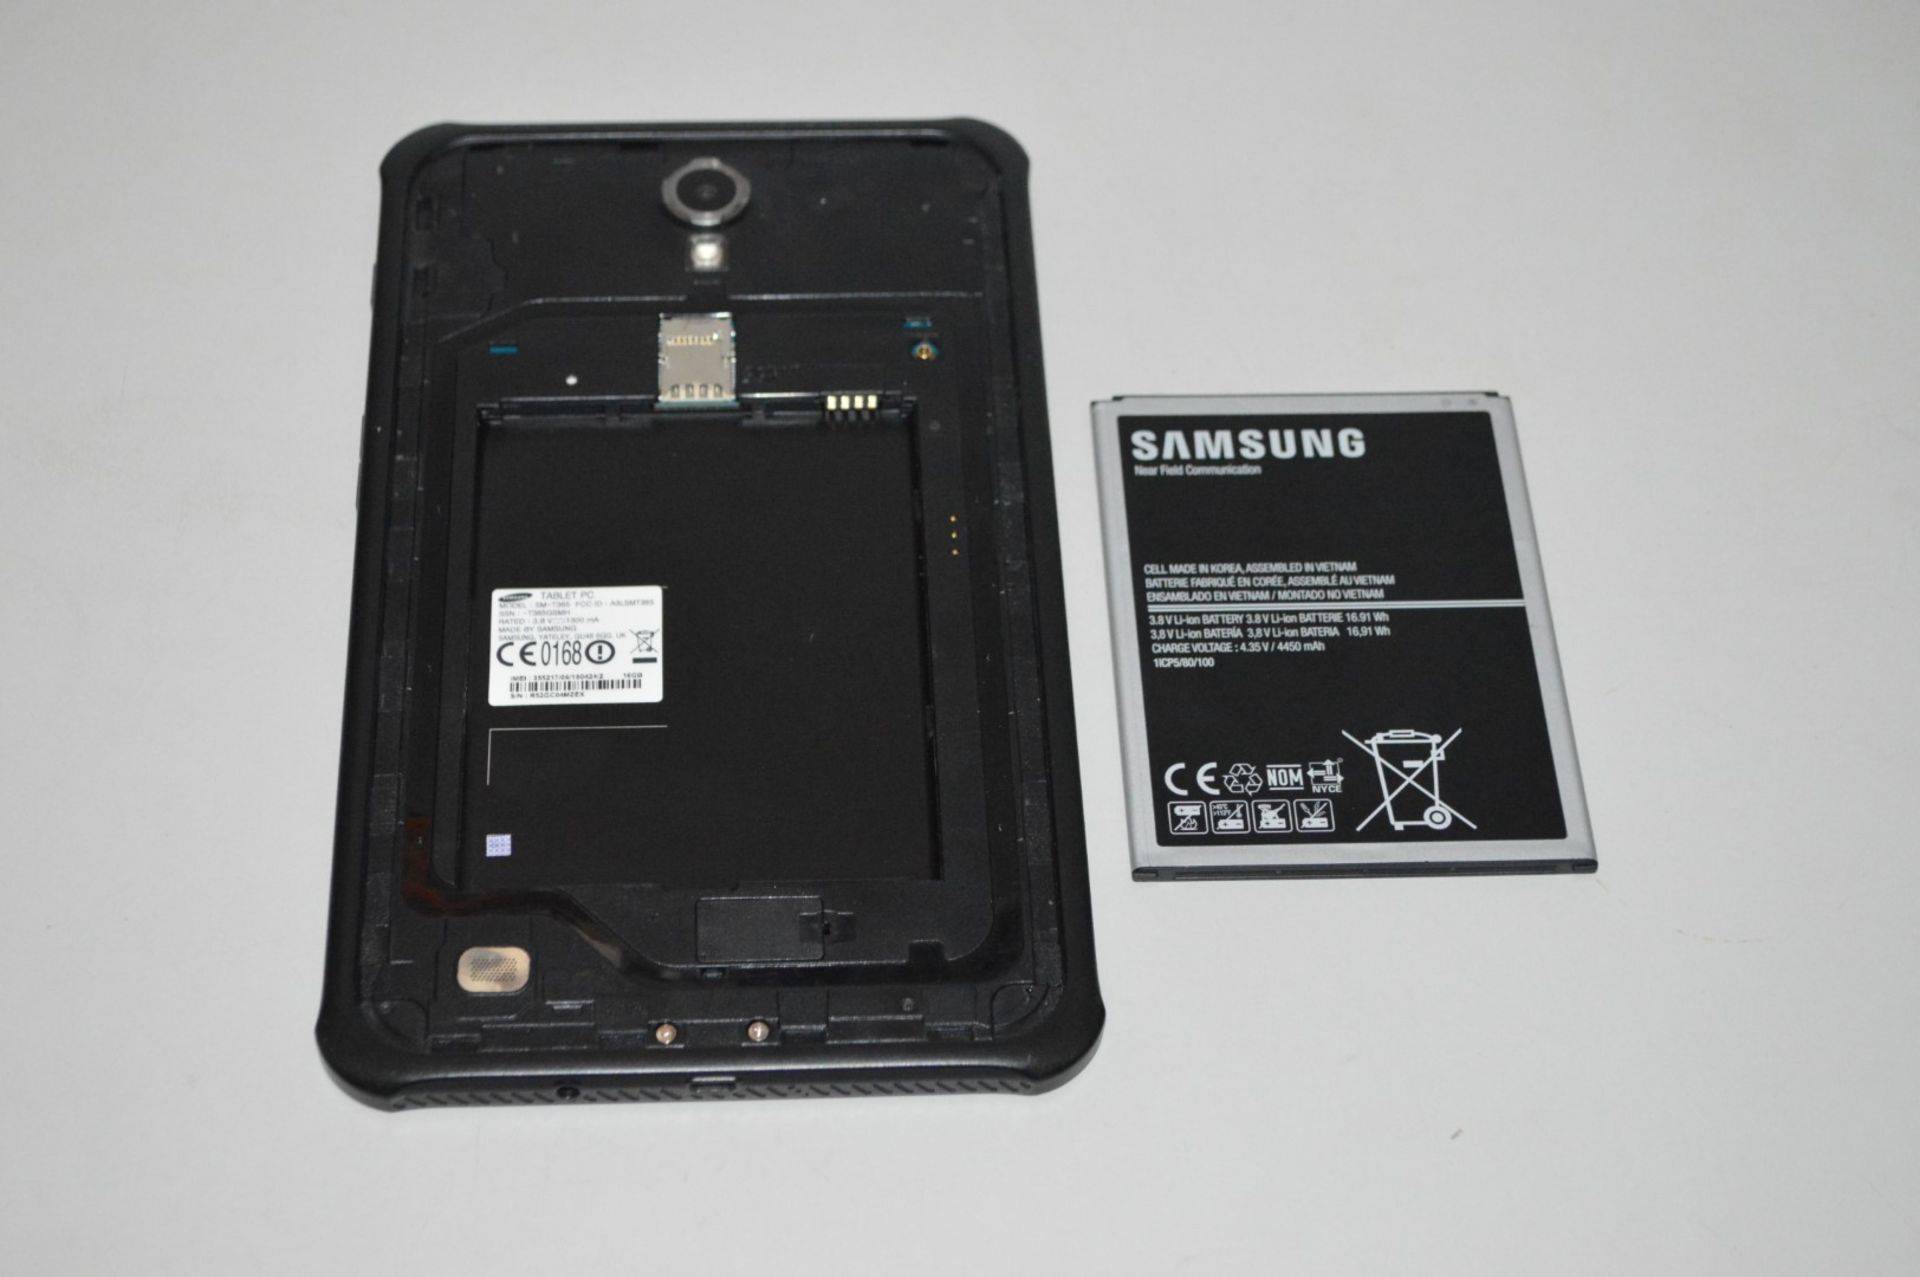 1 x SAMSUNG Galaxy Tab Active 8.0 SM-T365 LTE Cellular Tablet - Ref RB001 - Image 2 of 4